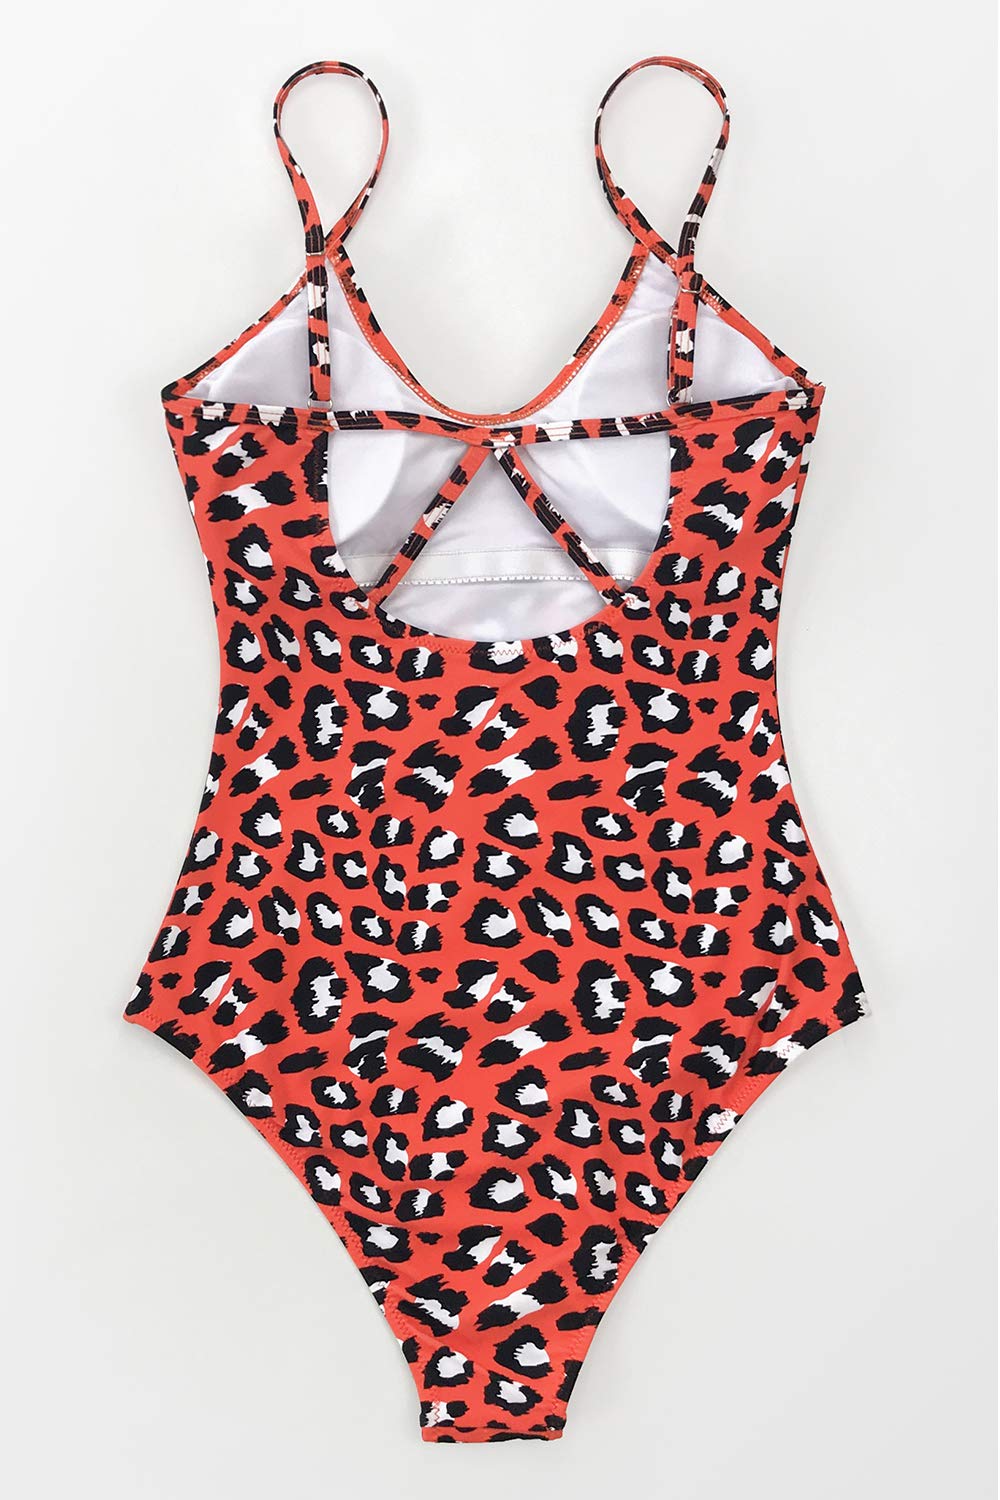 Cupshe Women's Red Leopard Print V Neck One Piece Swimsuit Cutout Monokini - image 2 of 7